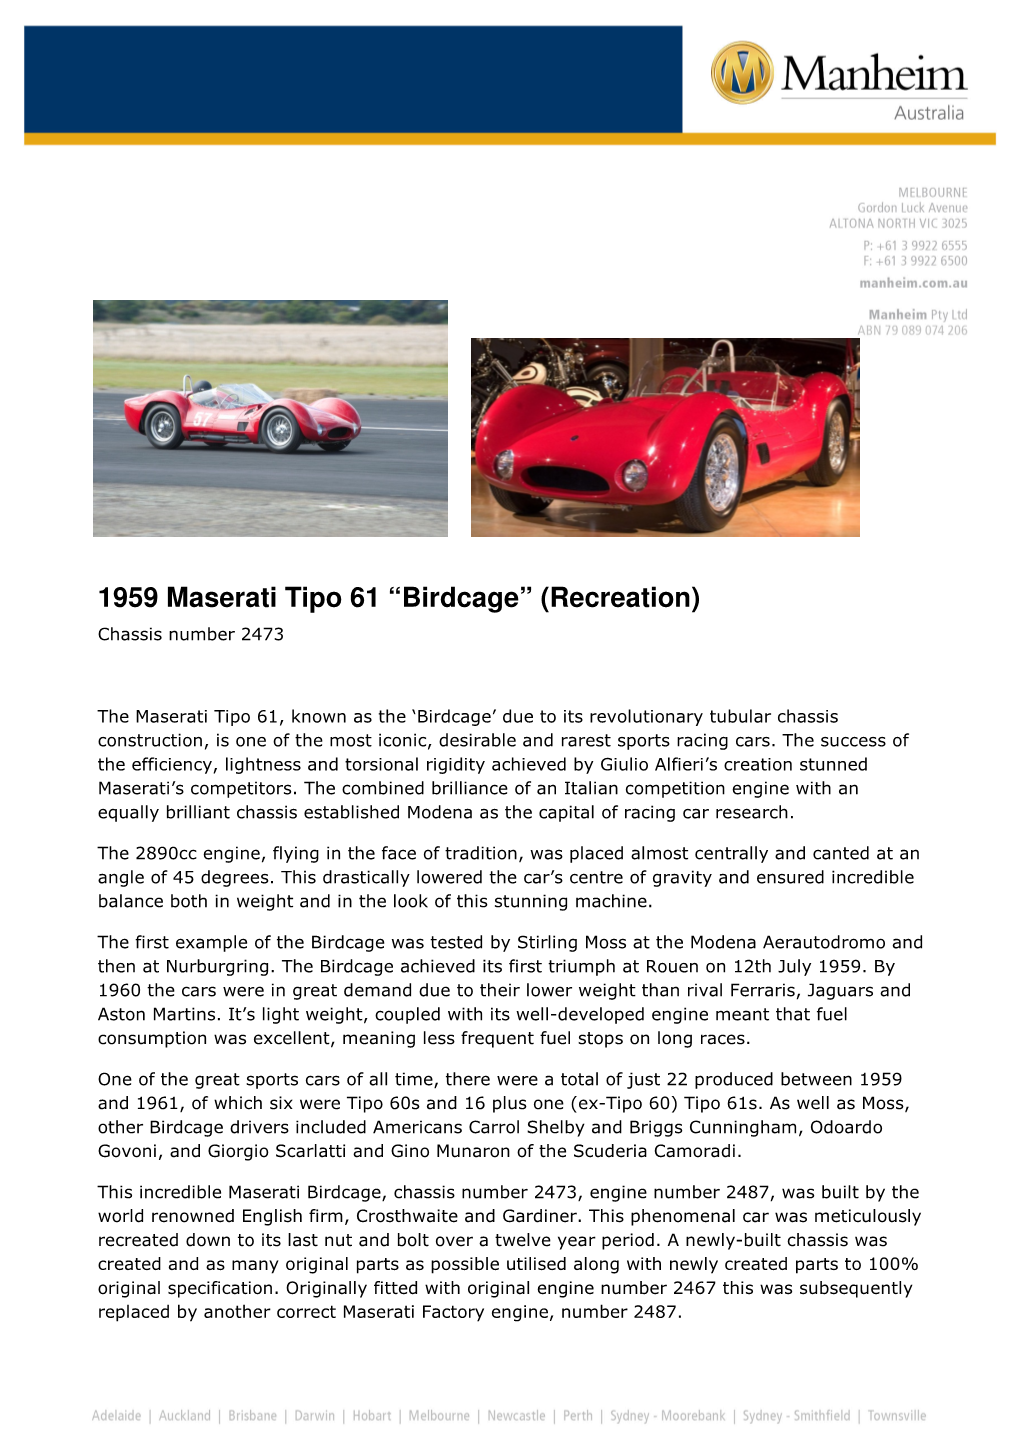 1959 Maserati Tipo 61 “Birdcage” (Recreation) Chassis Number 2473